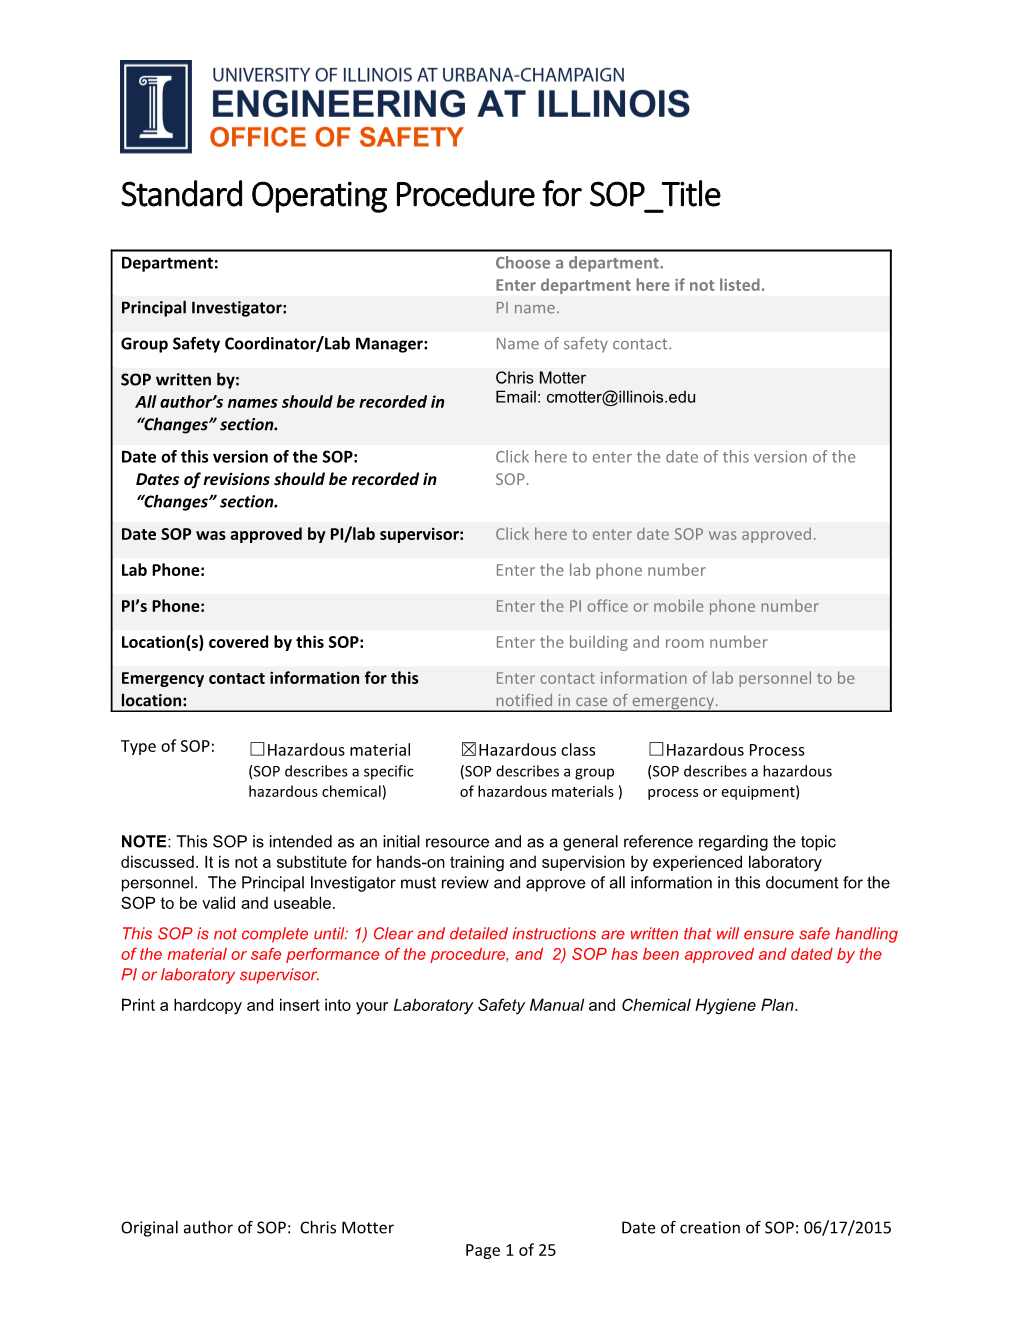 Standard Operating Procedure for Flammable Materials